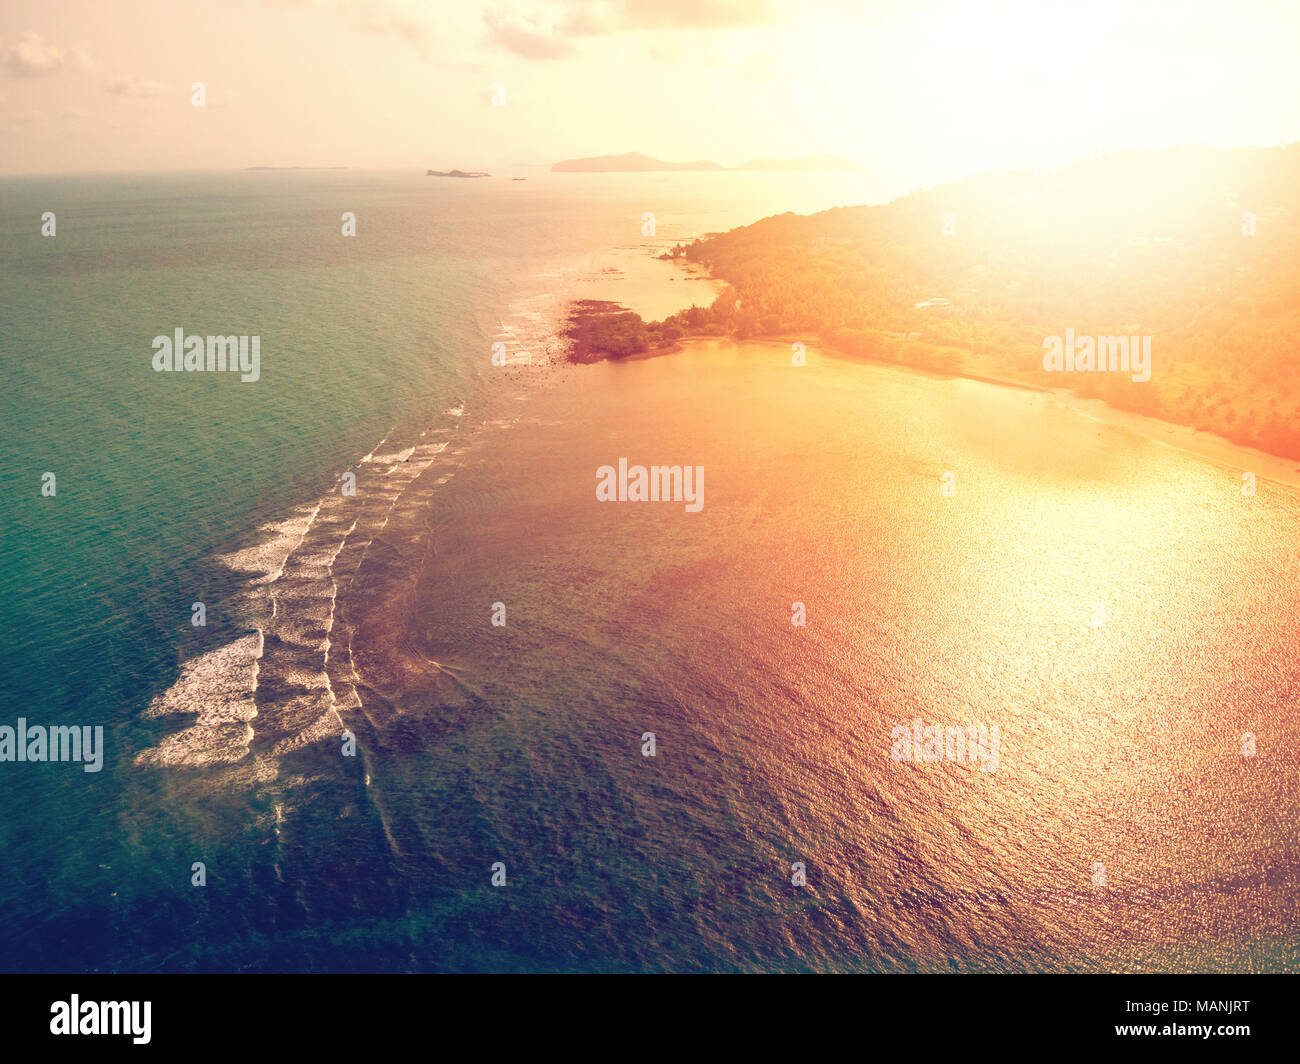 Aerial view of sunset over emerald tropical sea Stock Photo